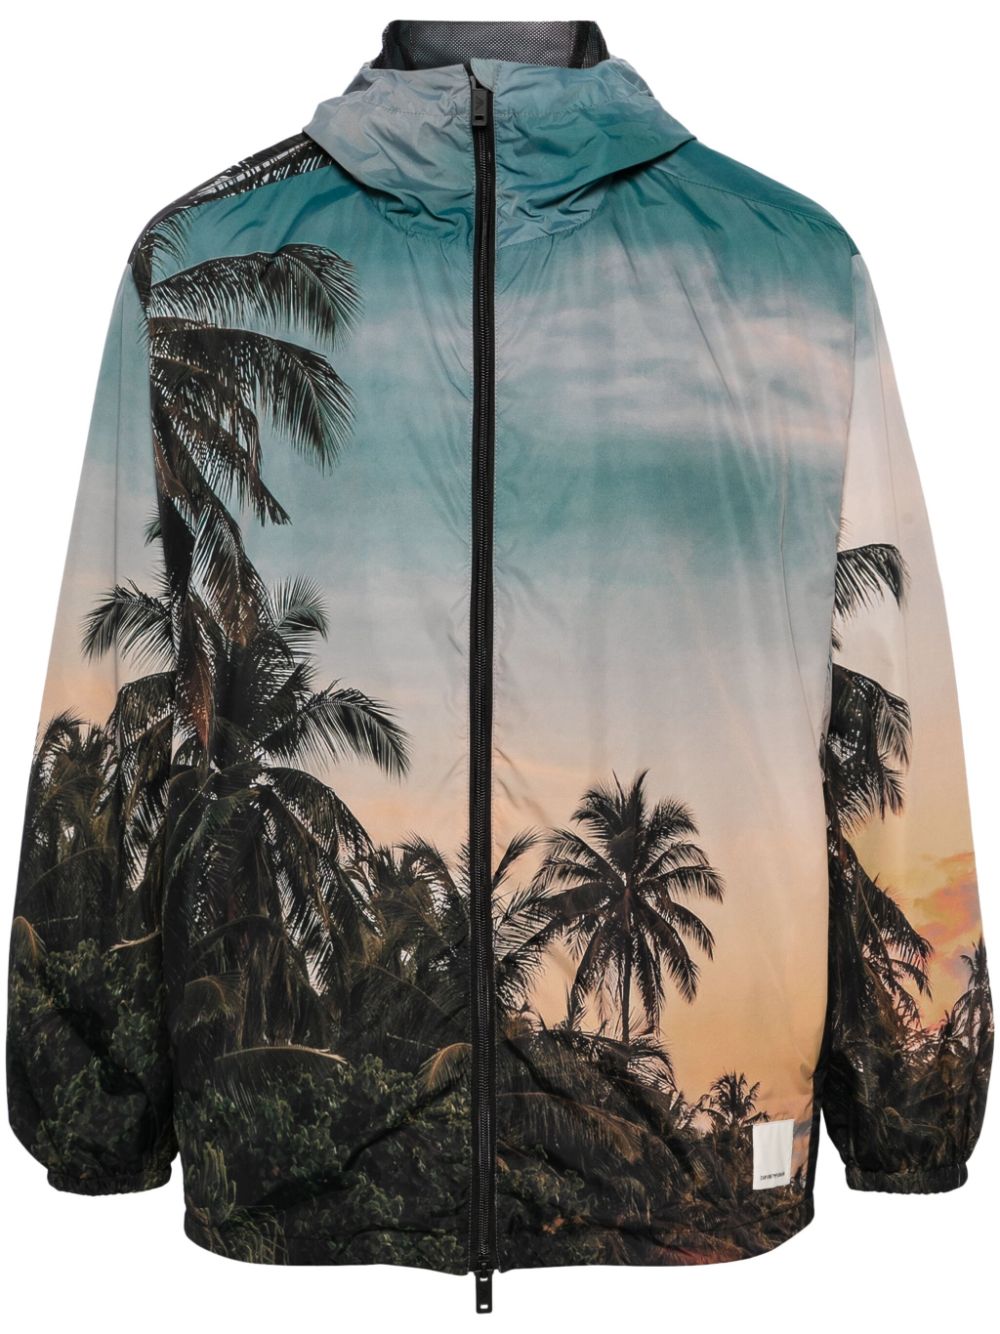 EMPORIO ARMANI Multicoloured Tropical Print Jacket for Men in Recycled Materials